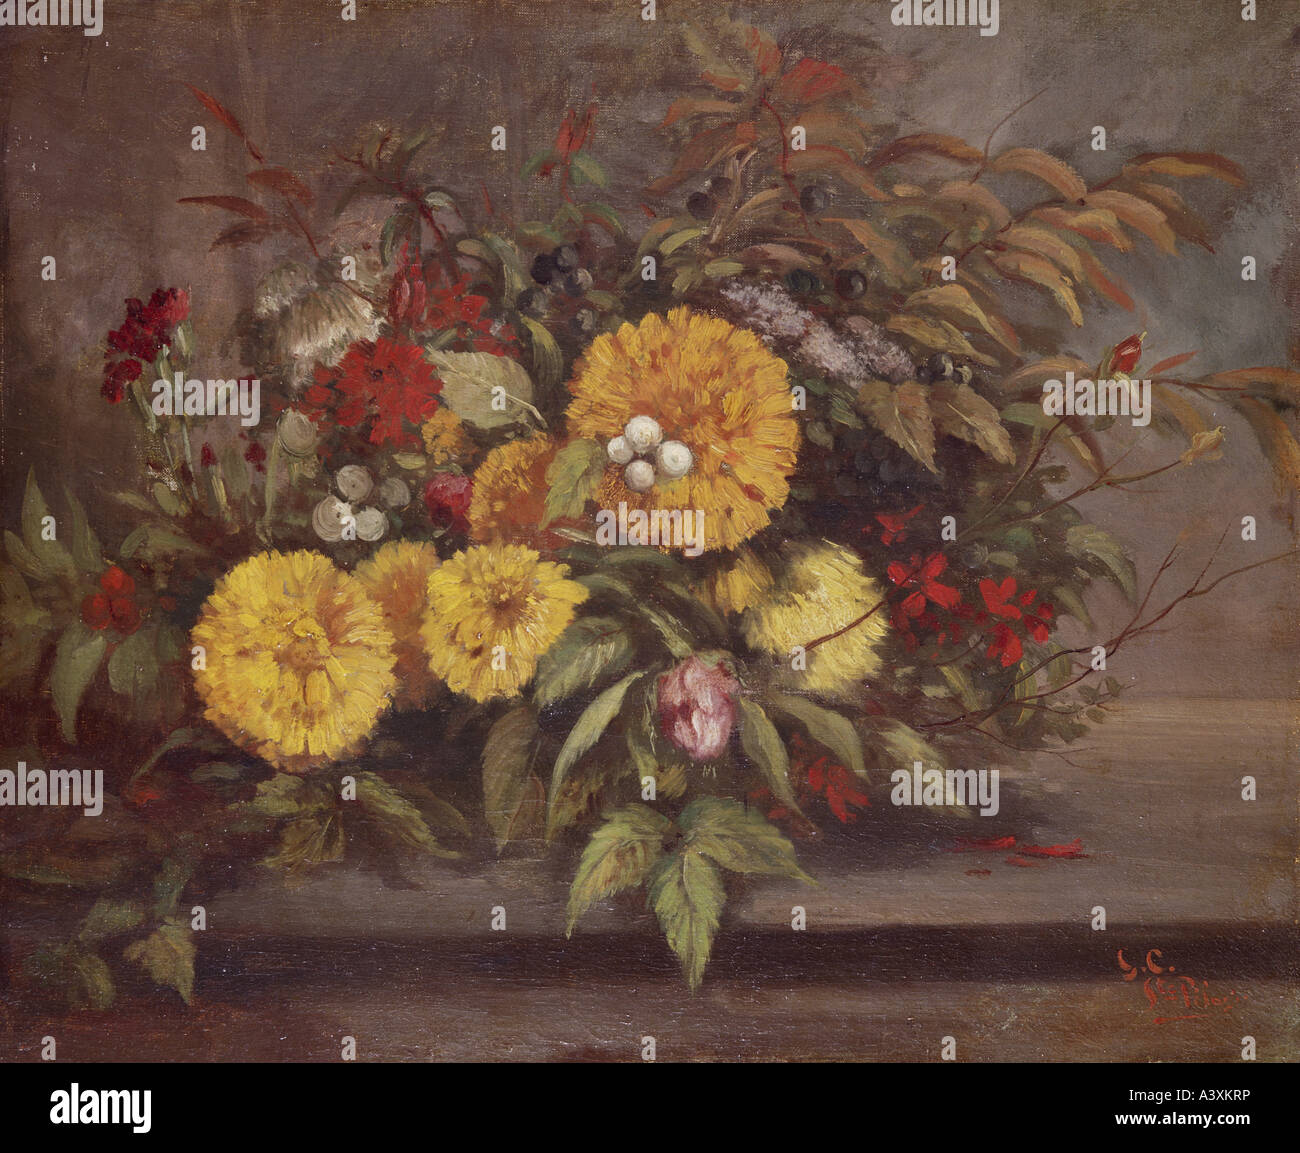 'fine arts, Courbet, Gustave, (1819 - 1877), painting, 'flower still life', historic, historical, Europe, France, 19th century Stock Photo